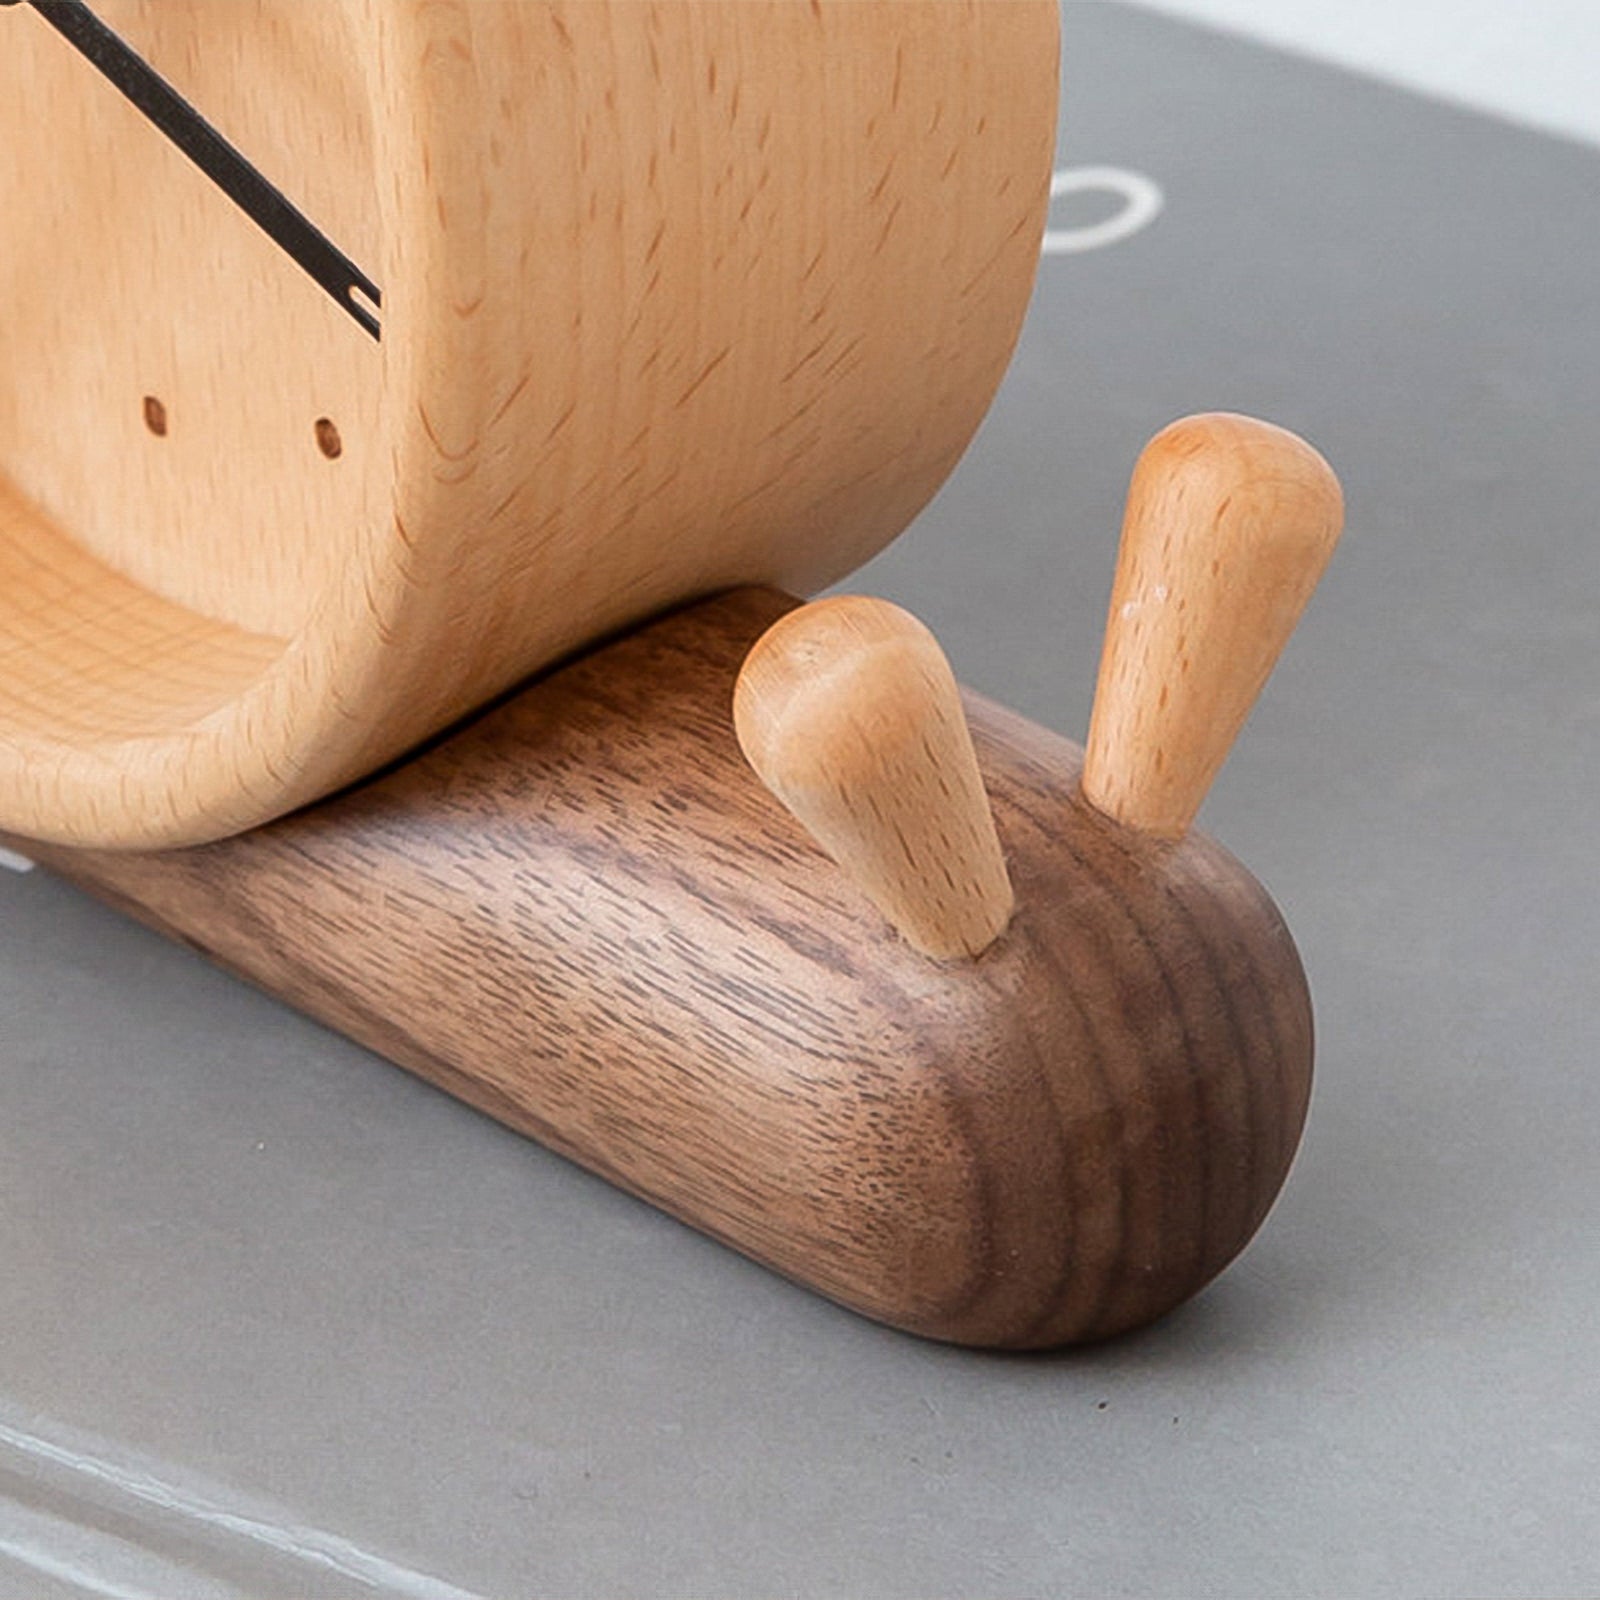 Simple Wooden Japanese Desk Clock Design You can't Miss it in 2021